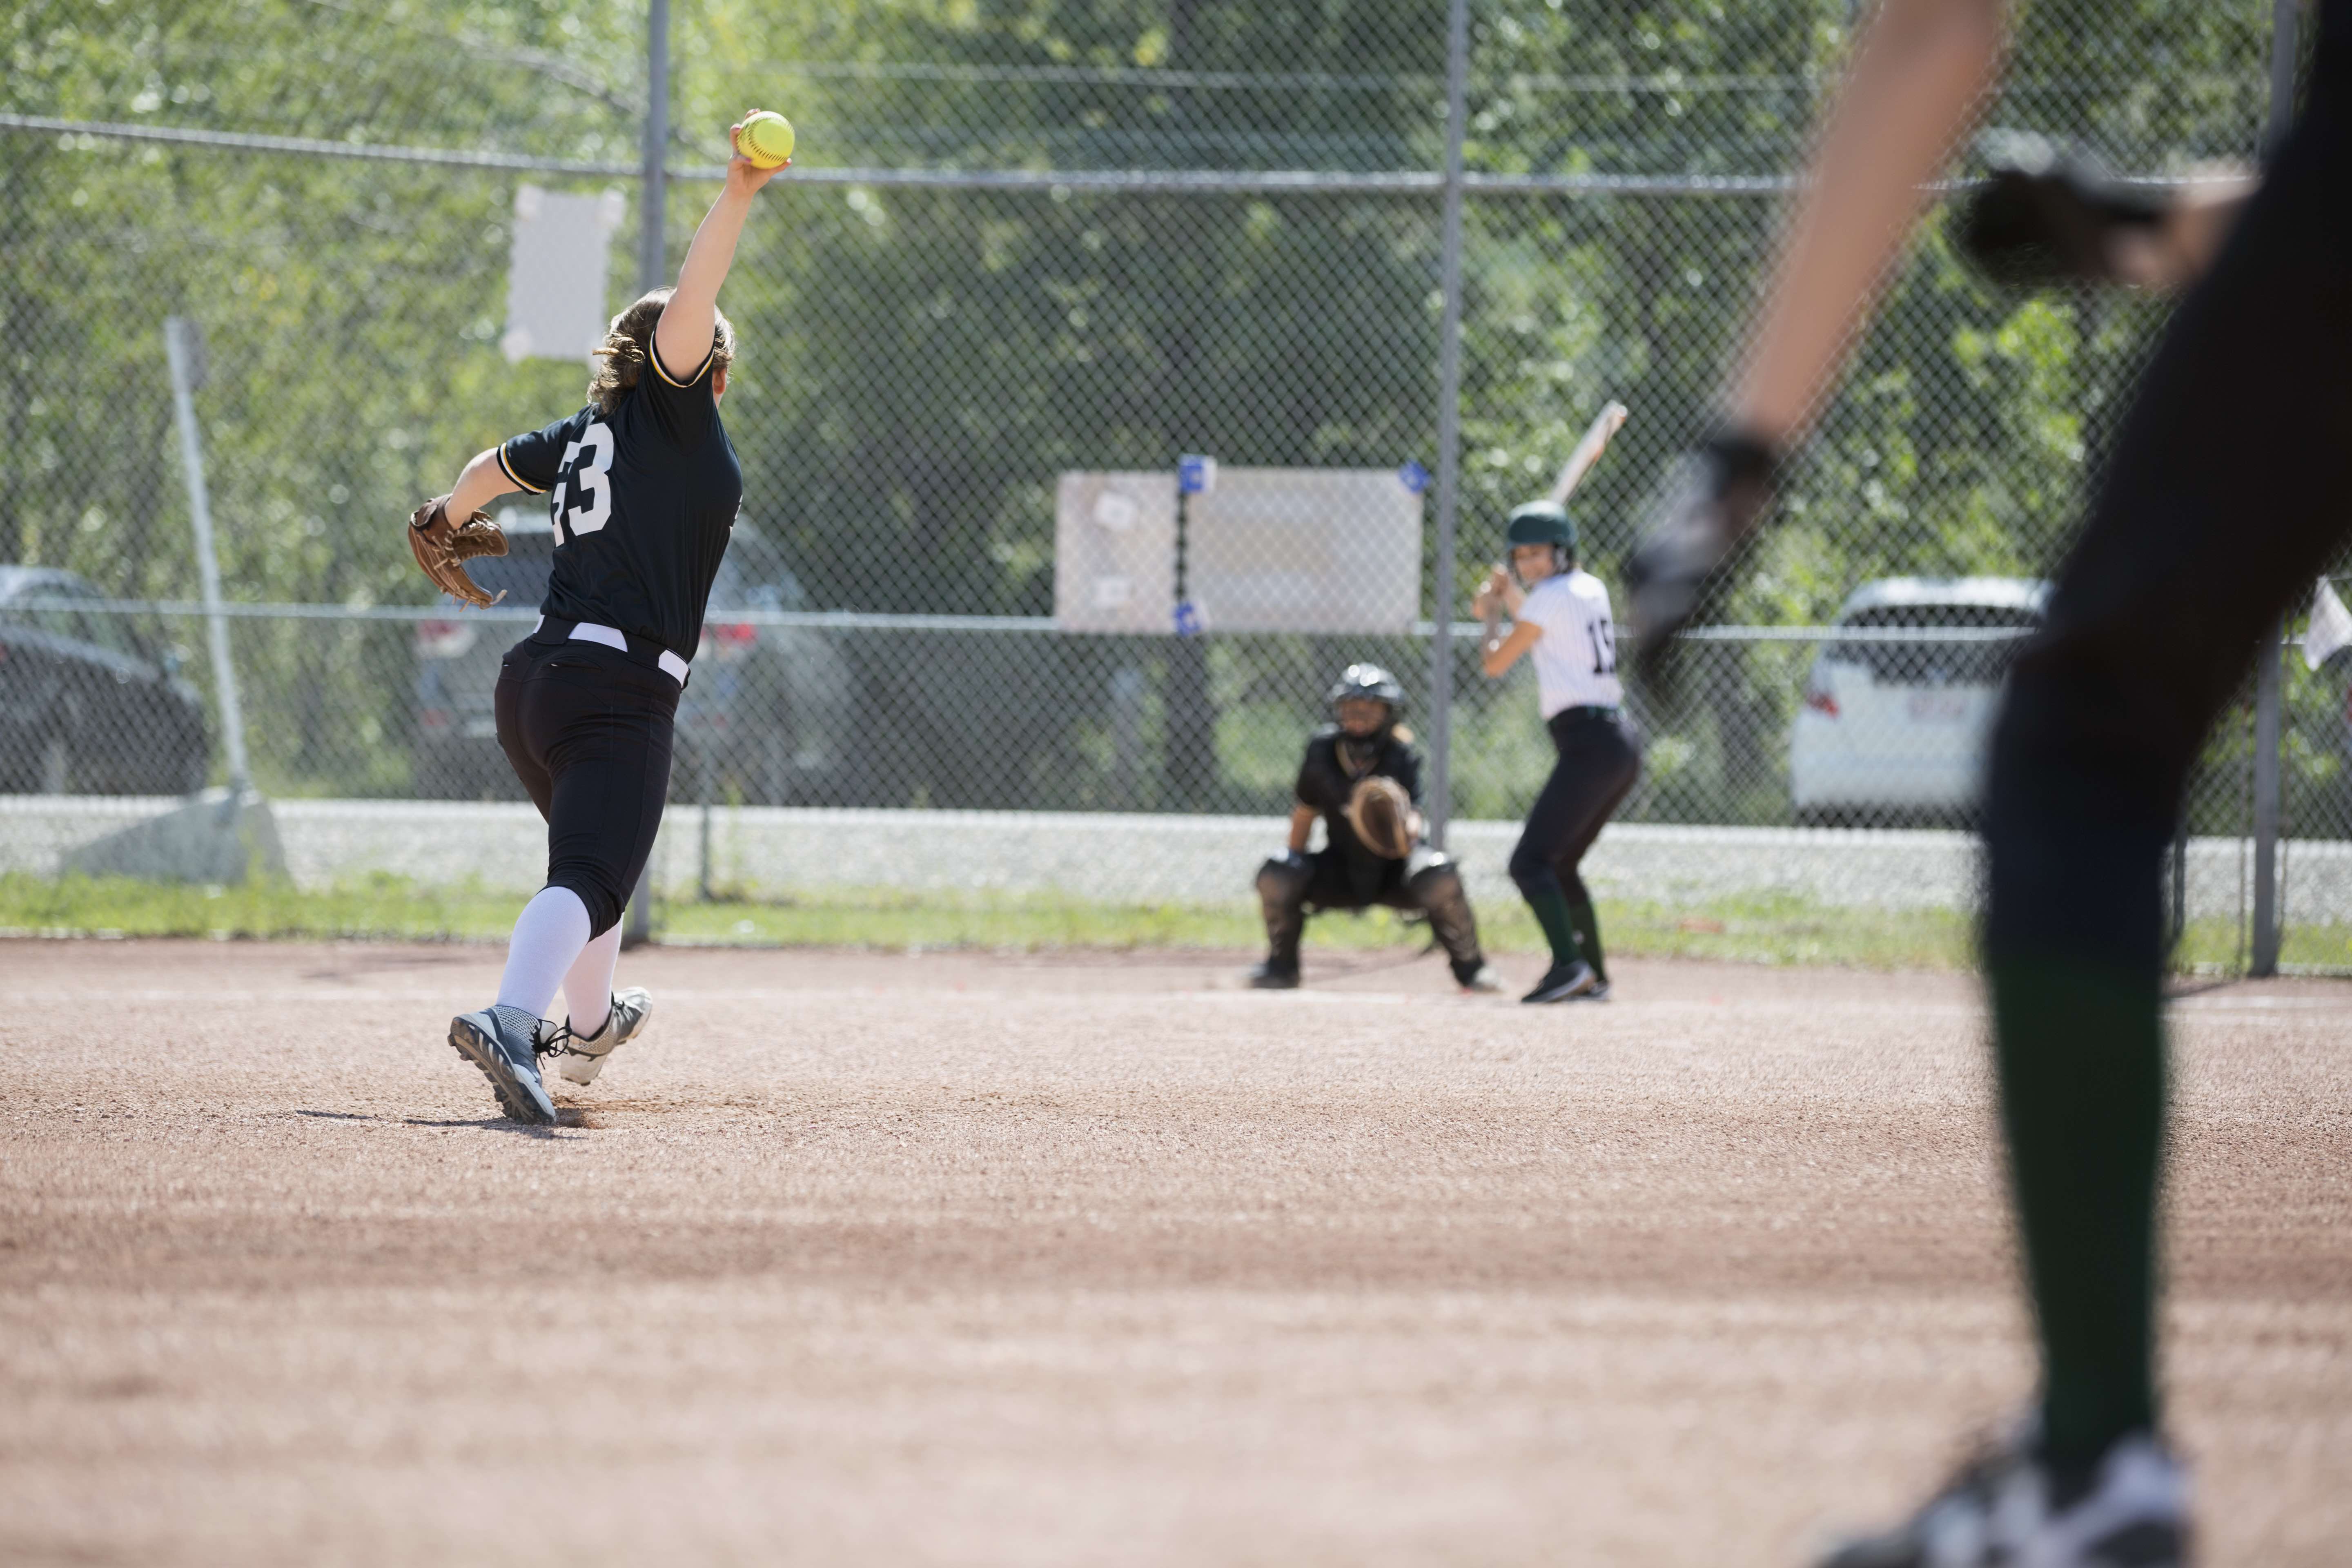 A softball player pitches the ball to the batter.